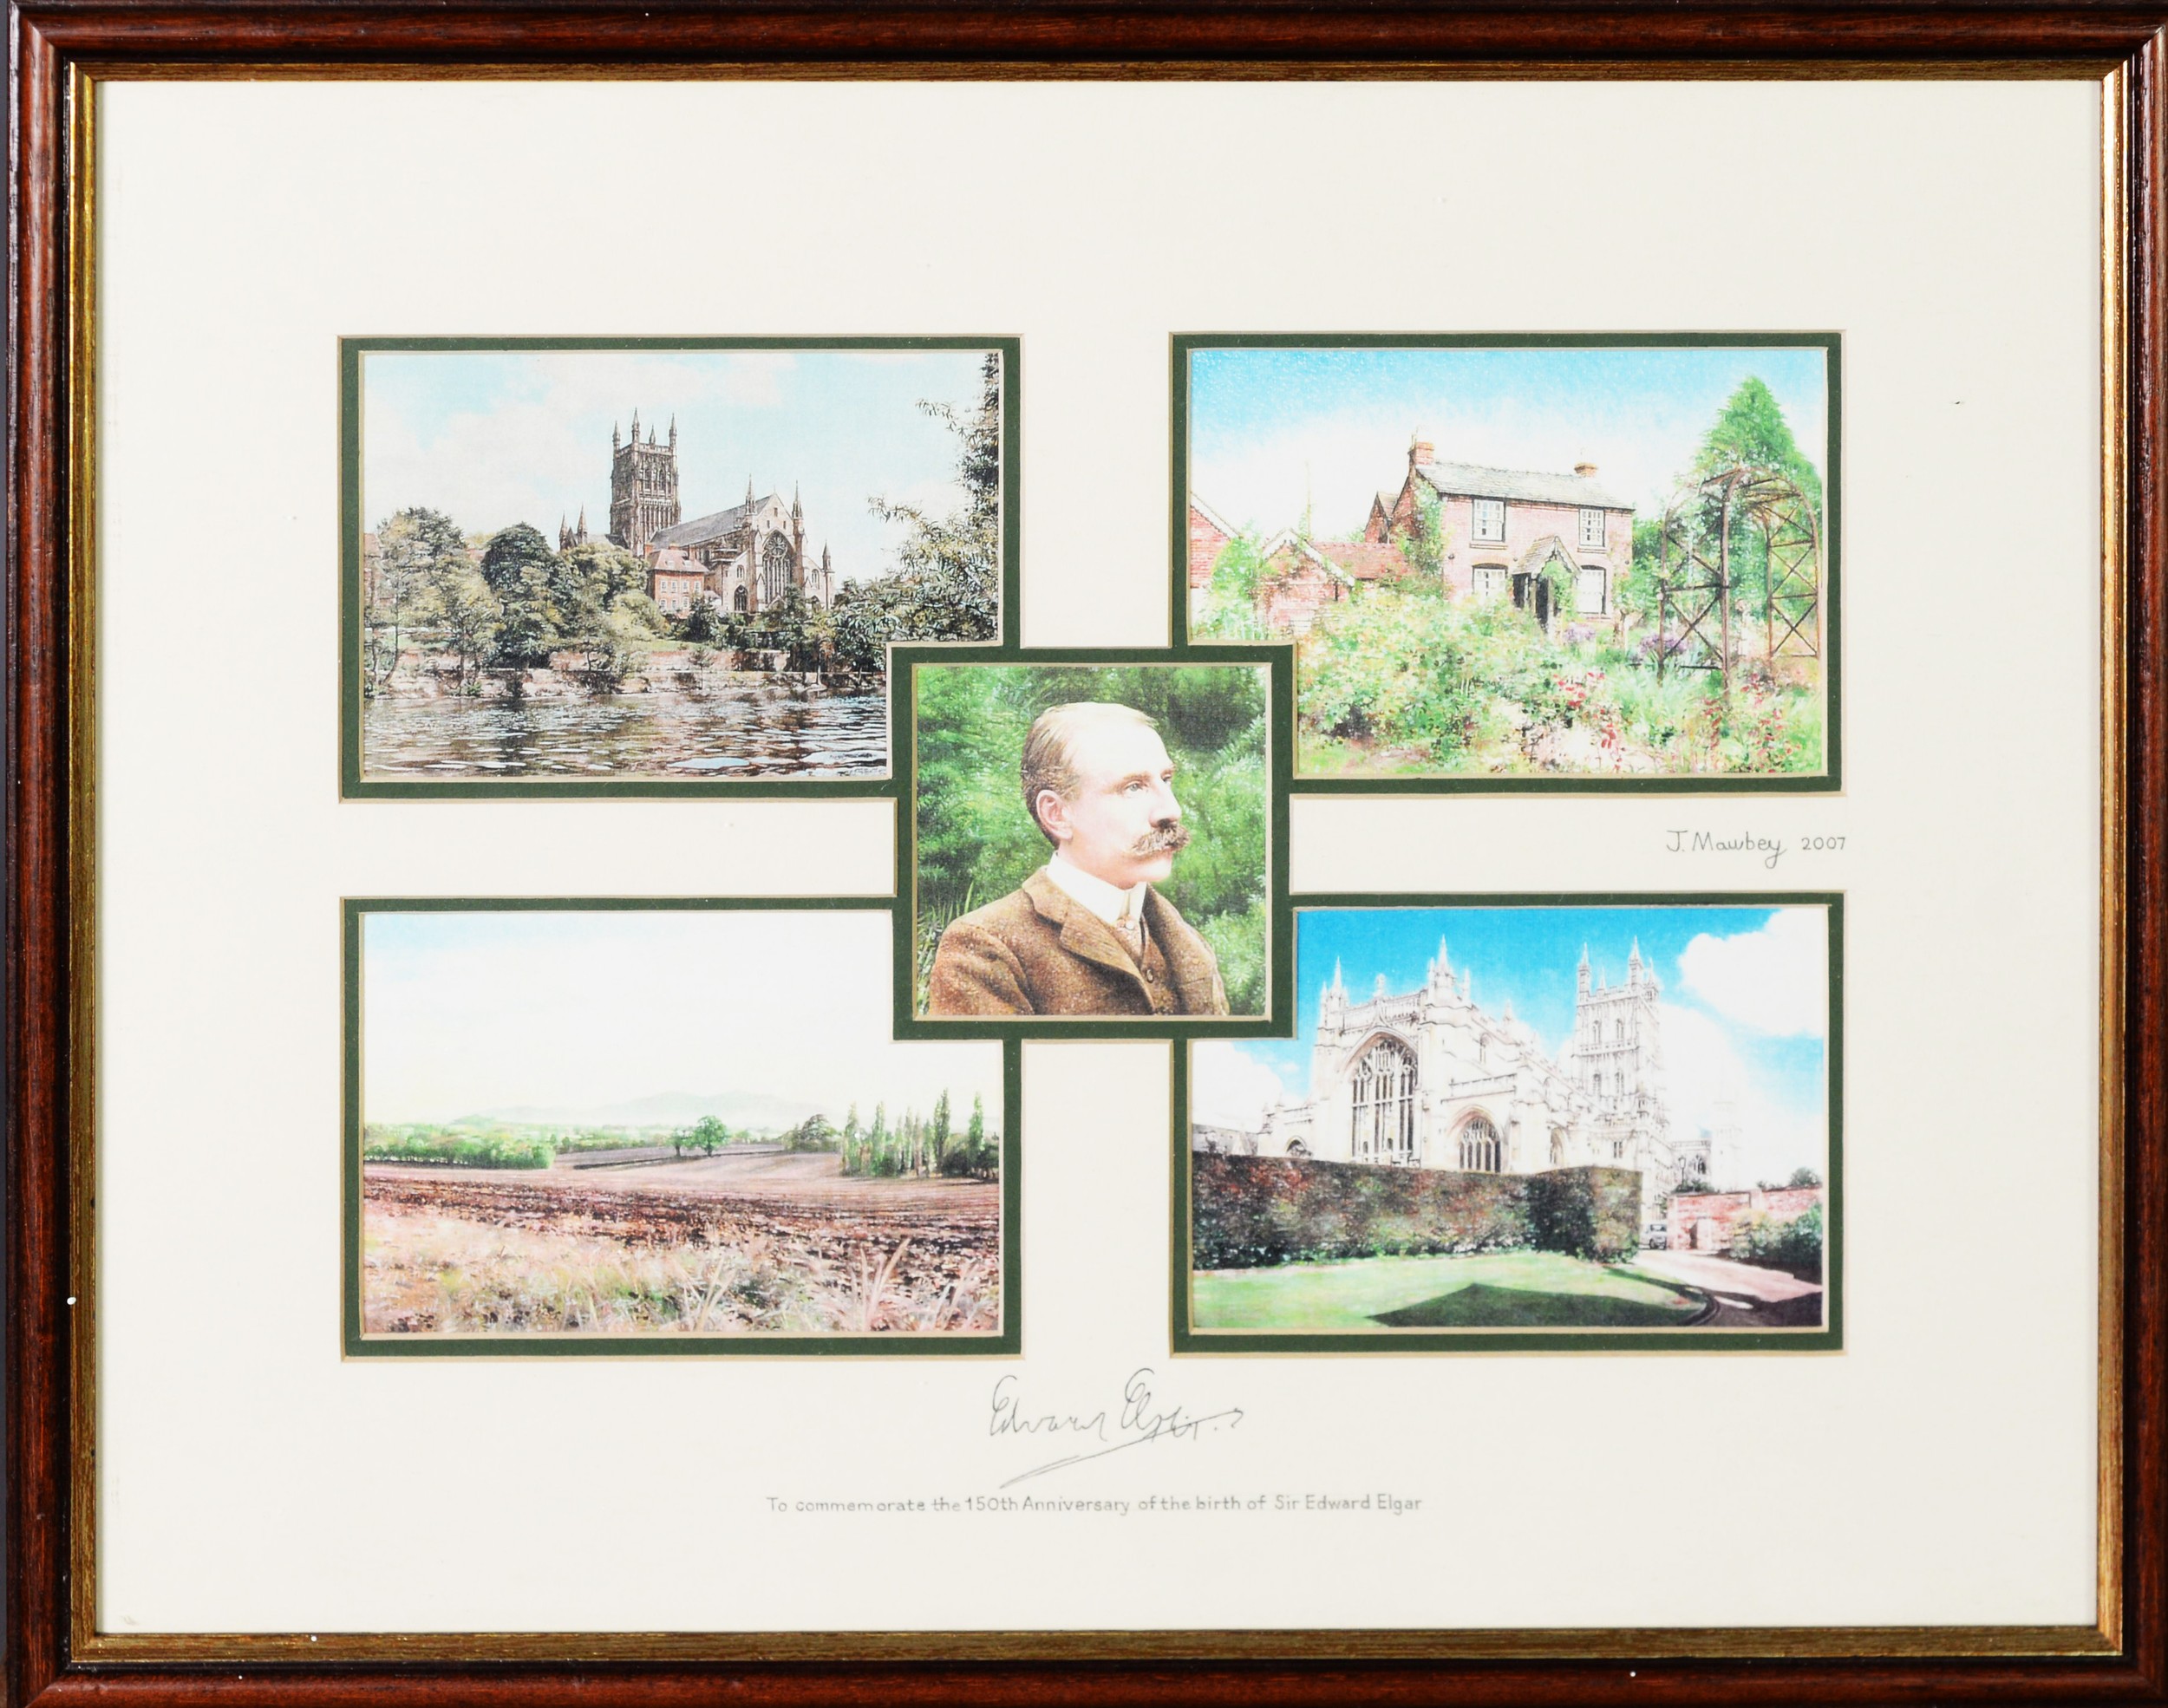 NORMAN PERRYMAN LIMITED EDITION LITHOGRAPH Published by the Elgar Birthplace Appeal, from a - Image 3 of 6